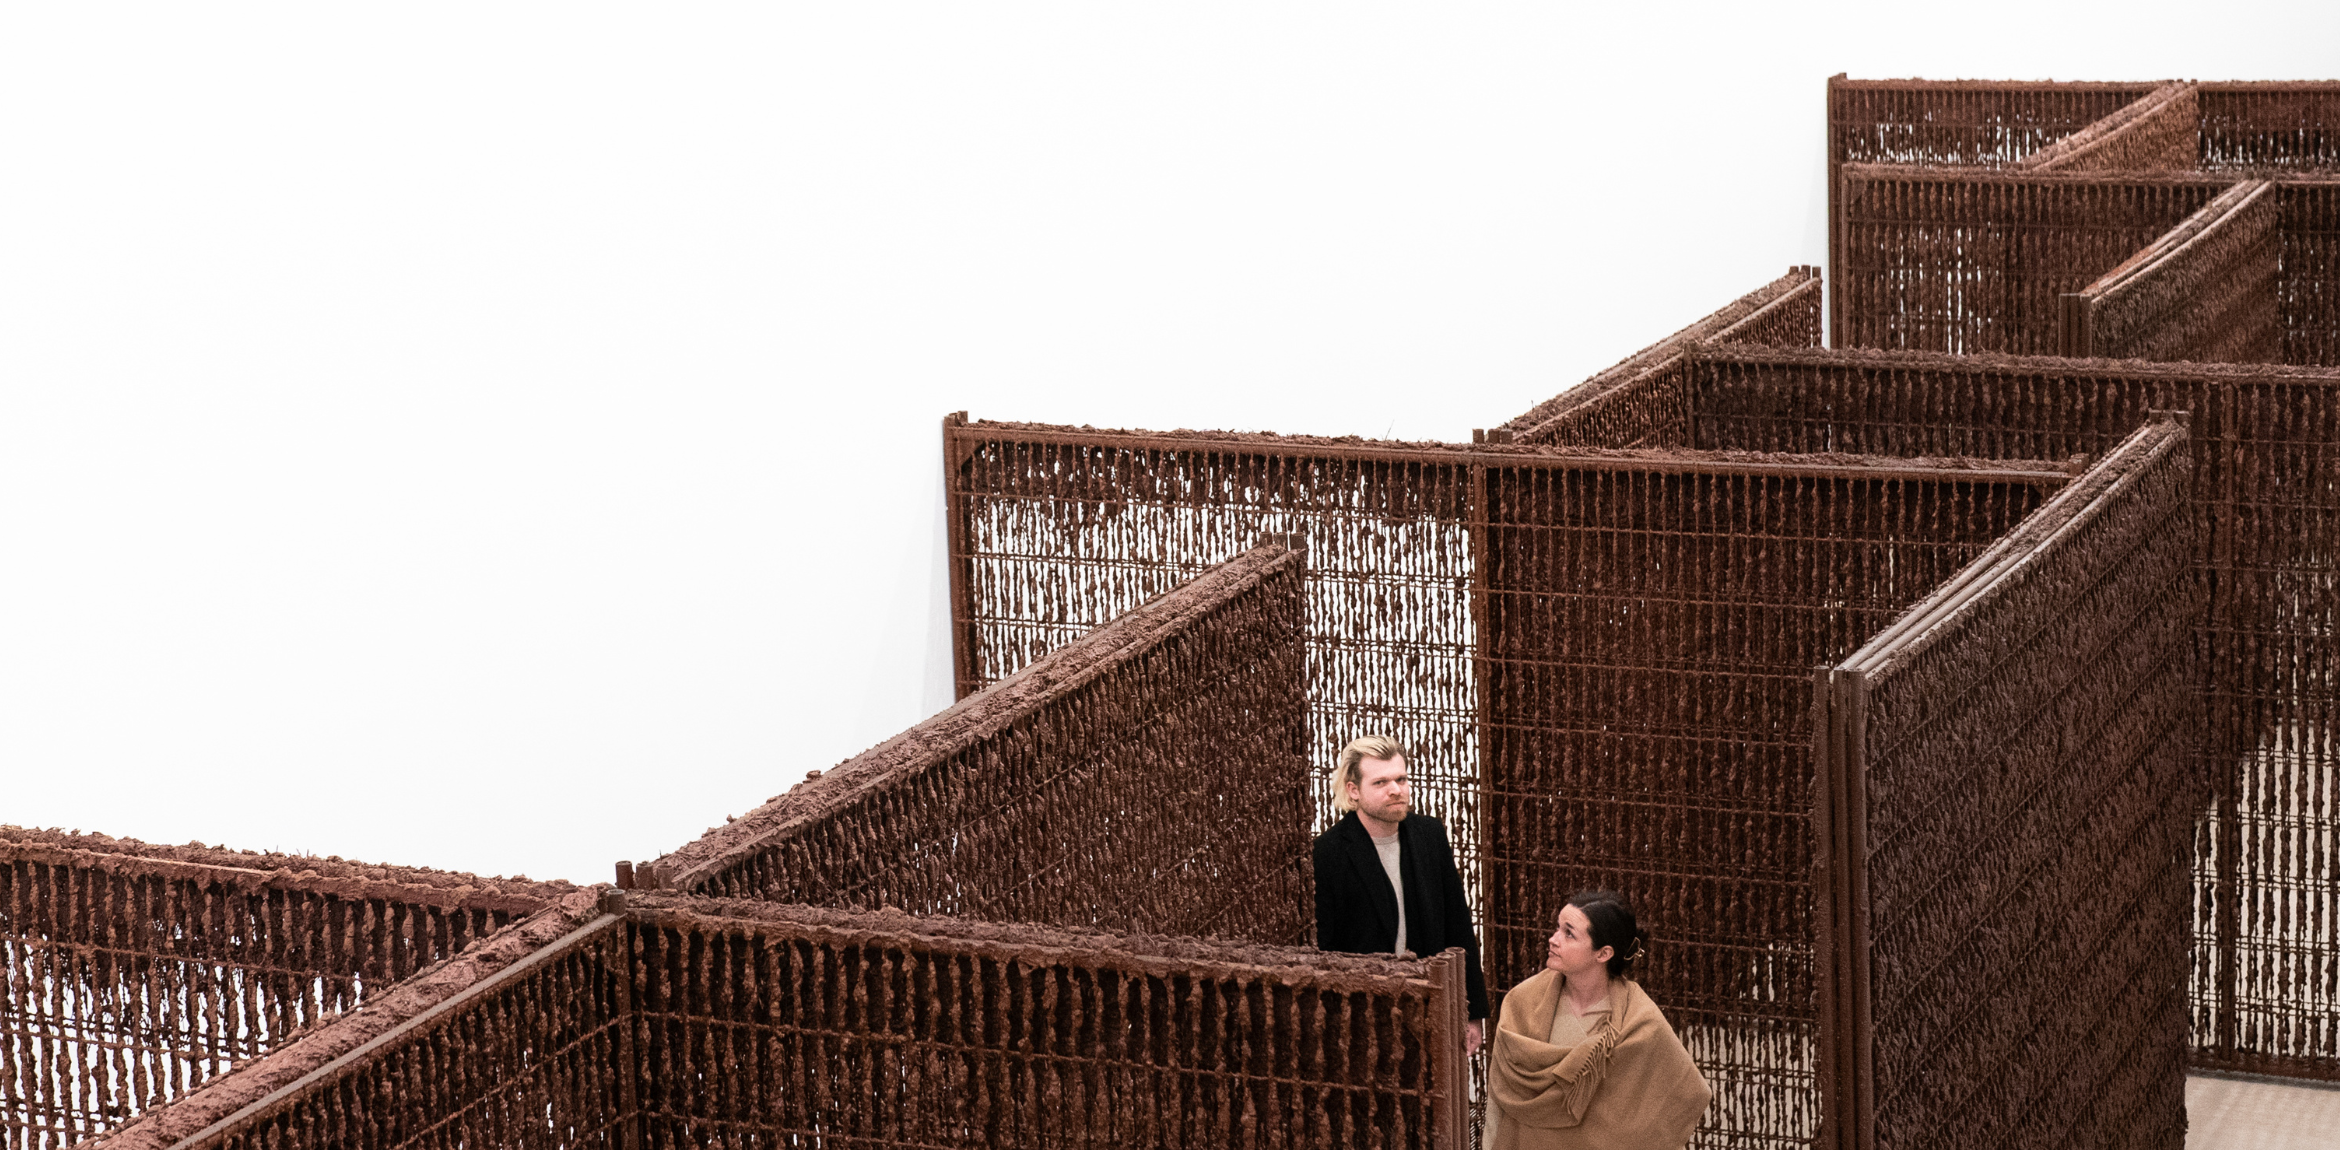 The image depicts two people standing in a maze-like structure made of rust-colored, woven metal or wire. The walls of the maze are tall and create a complex pattern of passages. The individuals appear to be observing their surroundings within the intricate layout of the maze.